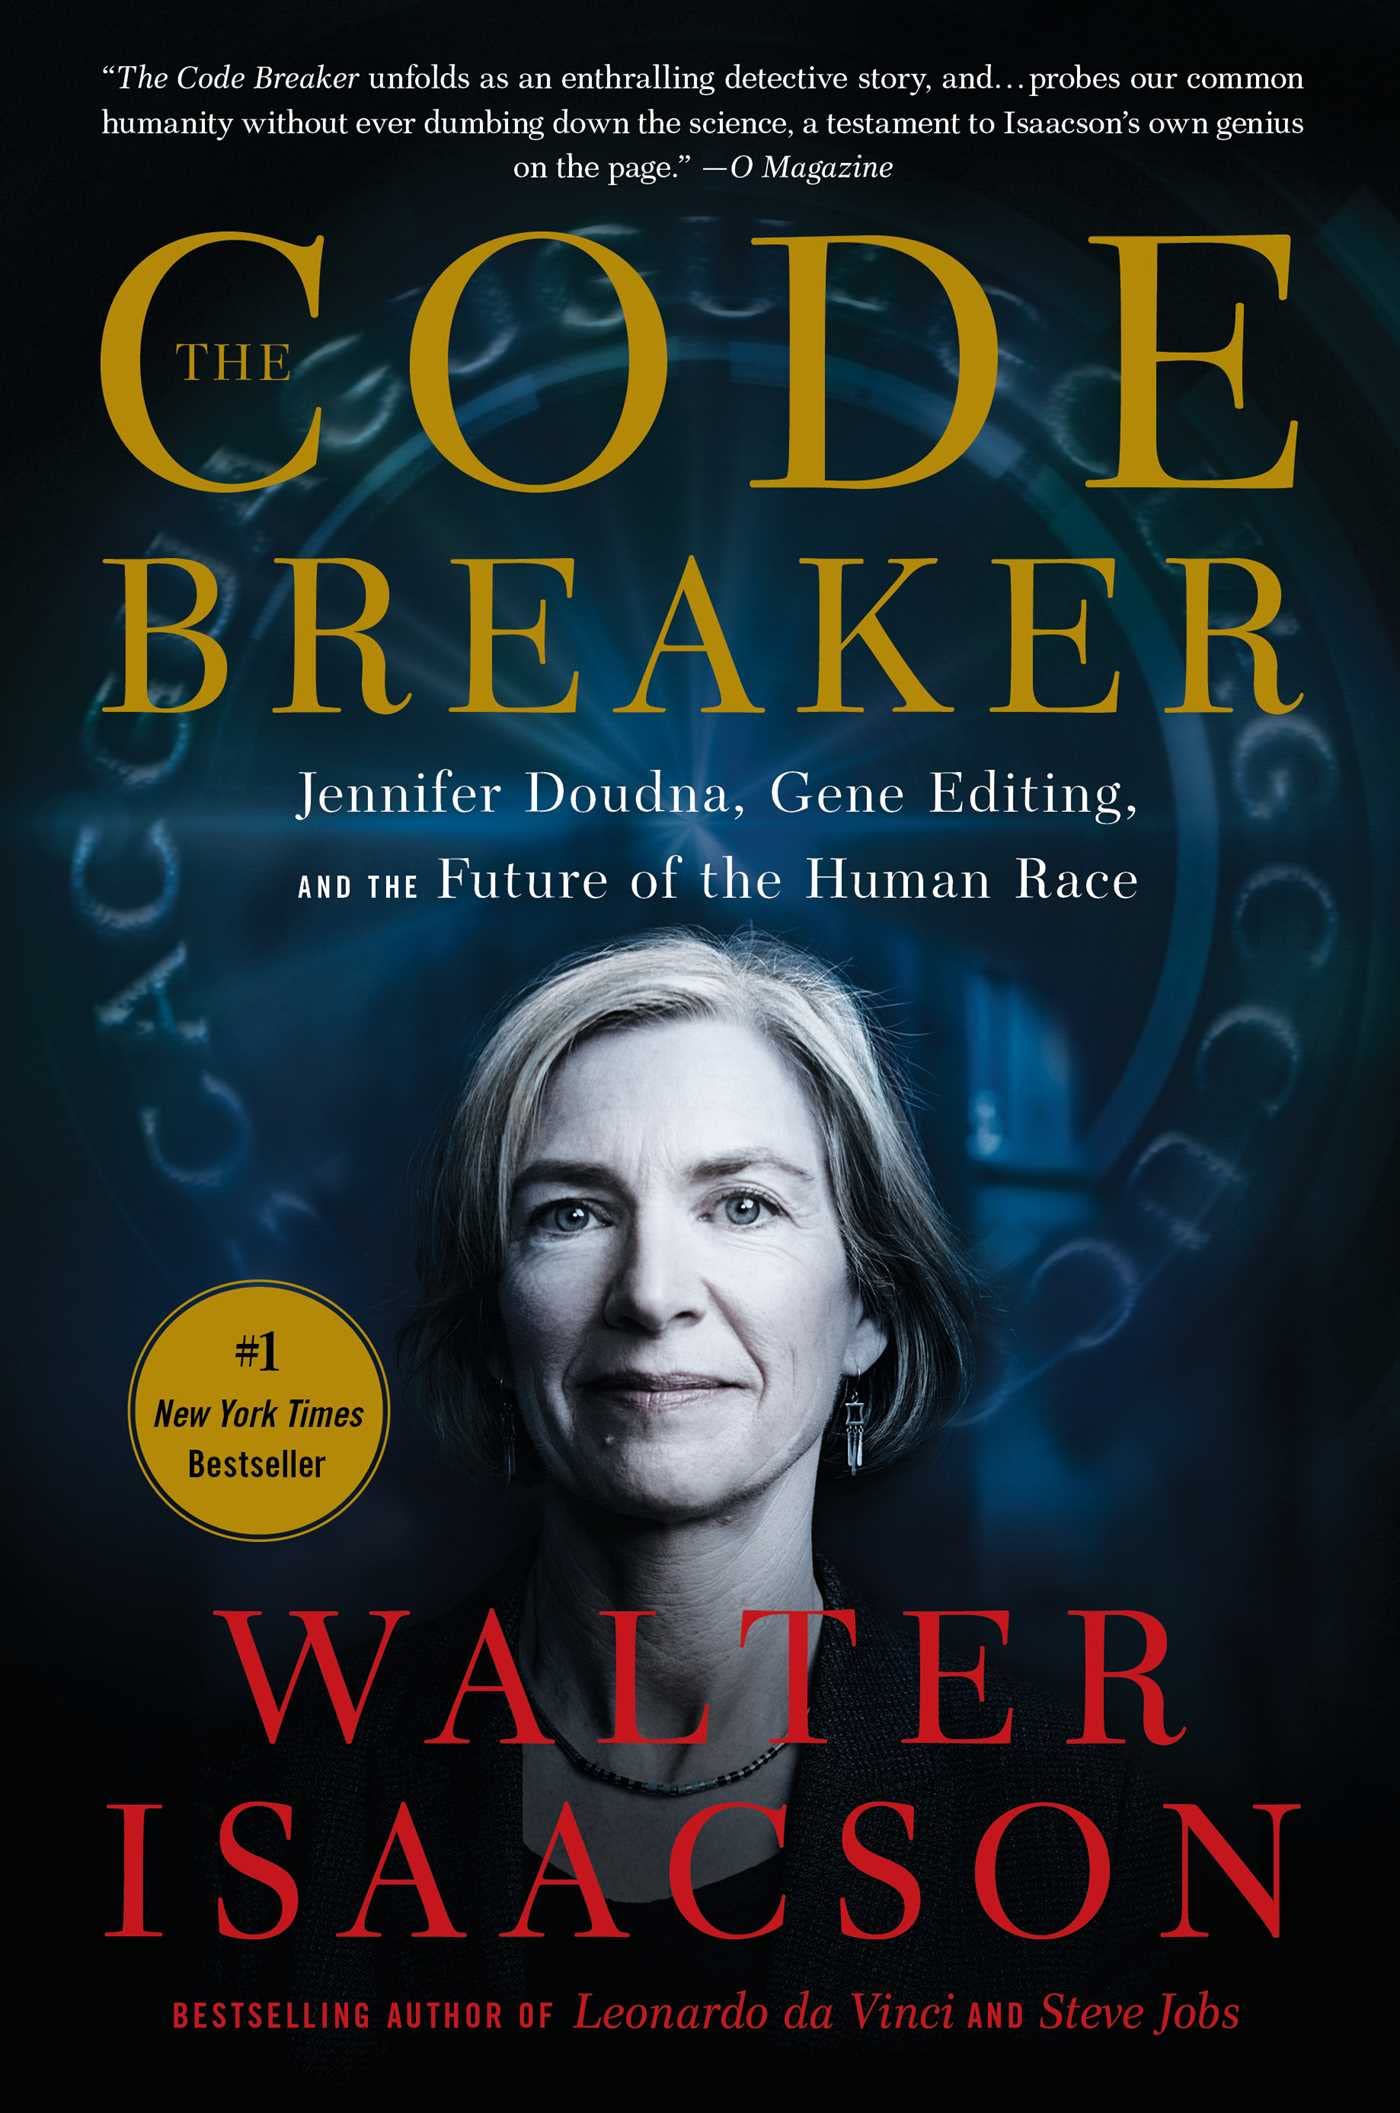 image  1 The Code Breaker: Jennifer Doudna Gene Editing And The Future Of The Human Race